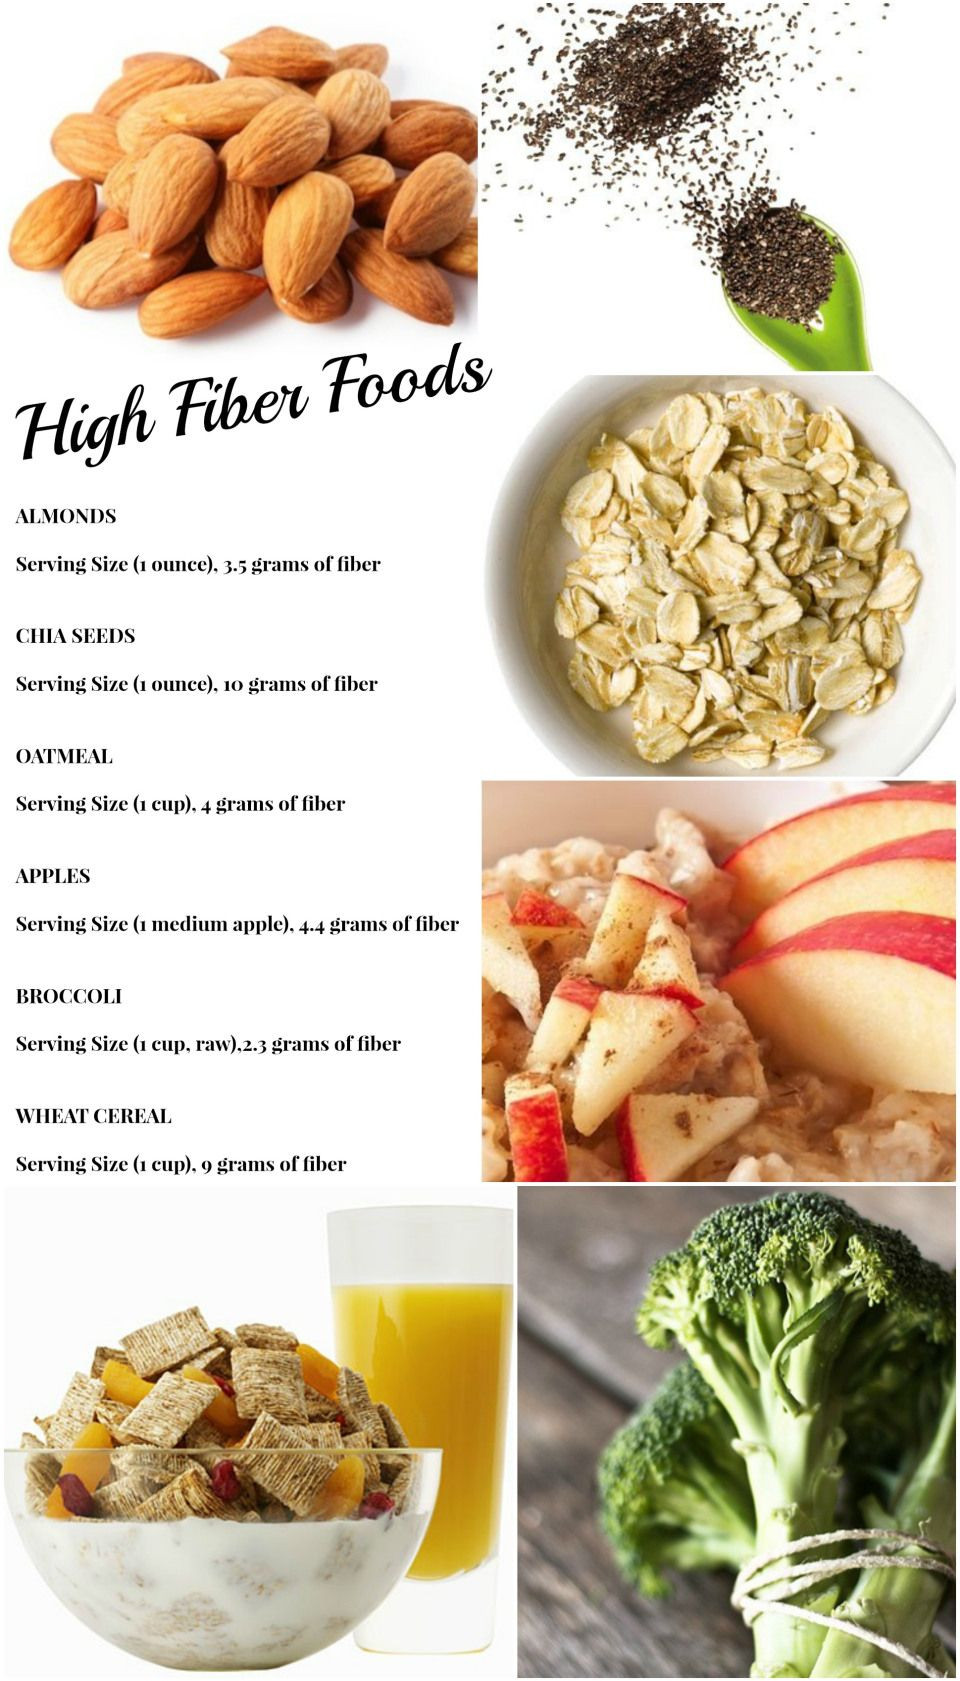 High Fiber Recipes For Weight Loss
 Lose More Weight with a High Fiber Diet